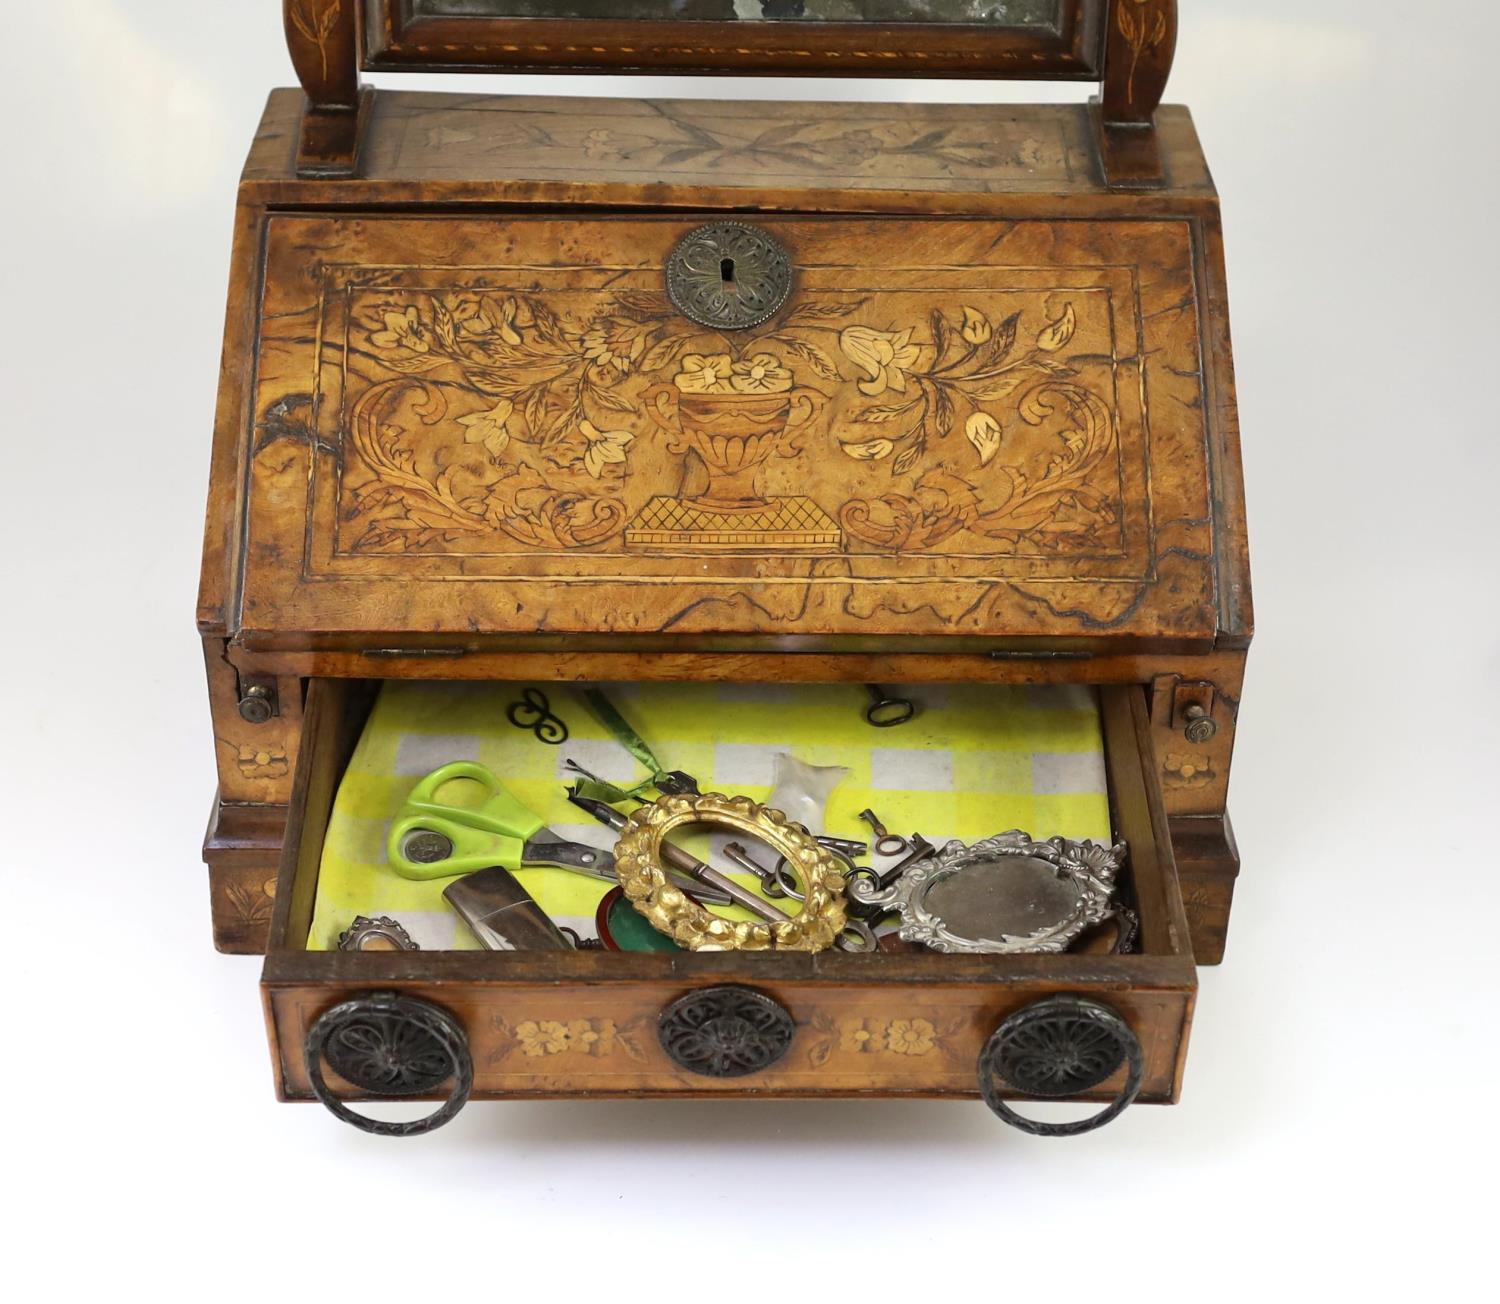 A mid to late 18th century Dutch walnut and marquetry toilet mirror bureau,with original plate, - Image 3 of 5